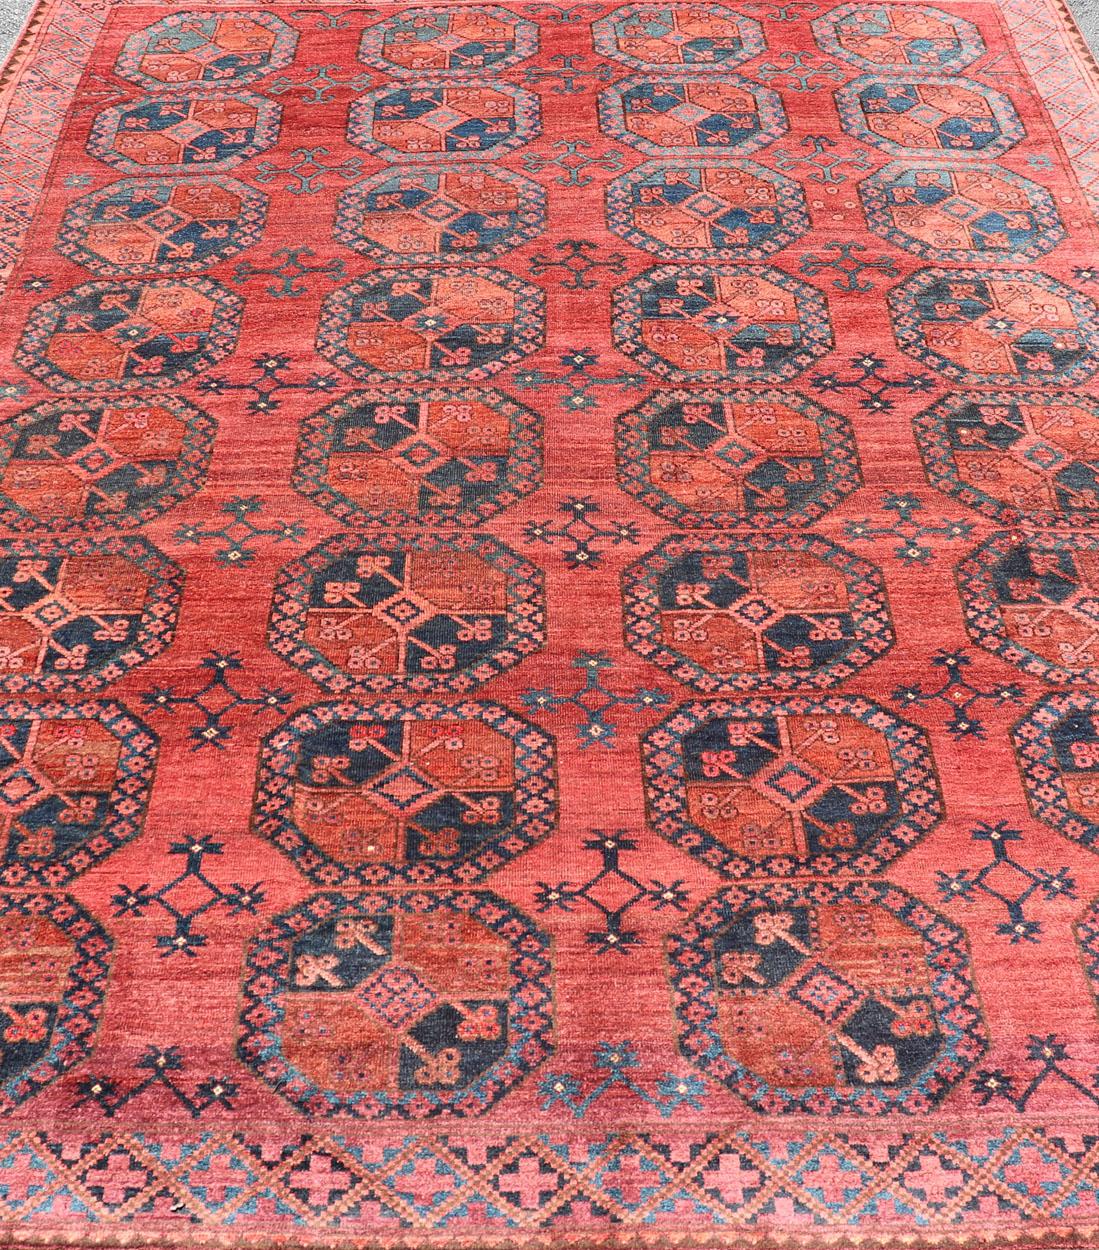 Hand-Knotted Turkomen Ersari Rug in Wool with Gul Design in Red, Orange and Blue For Sale 3